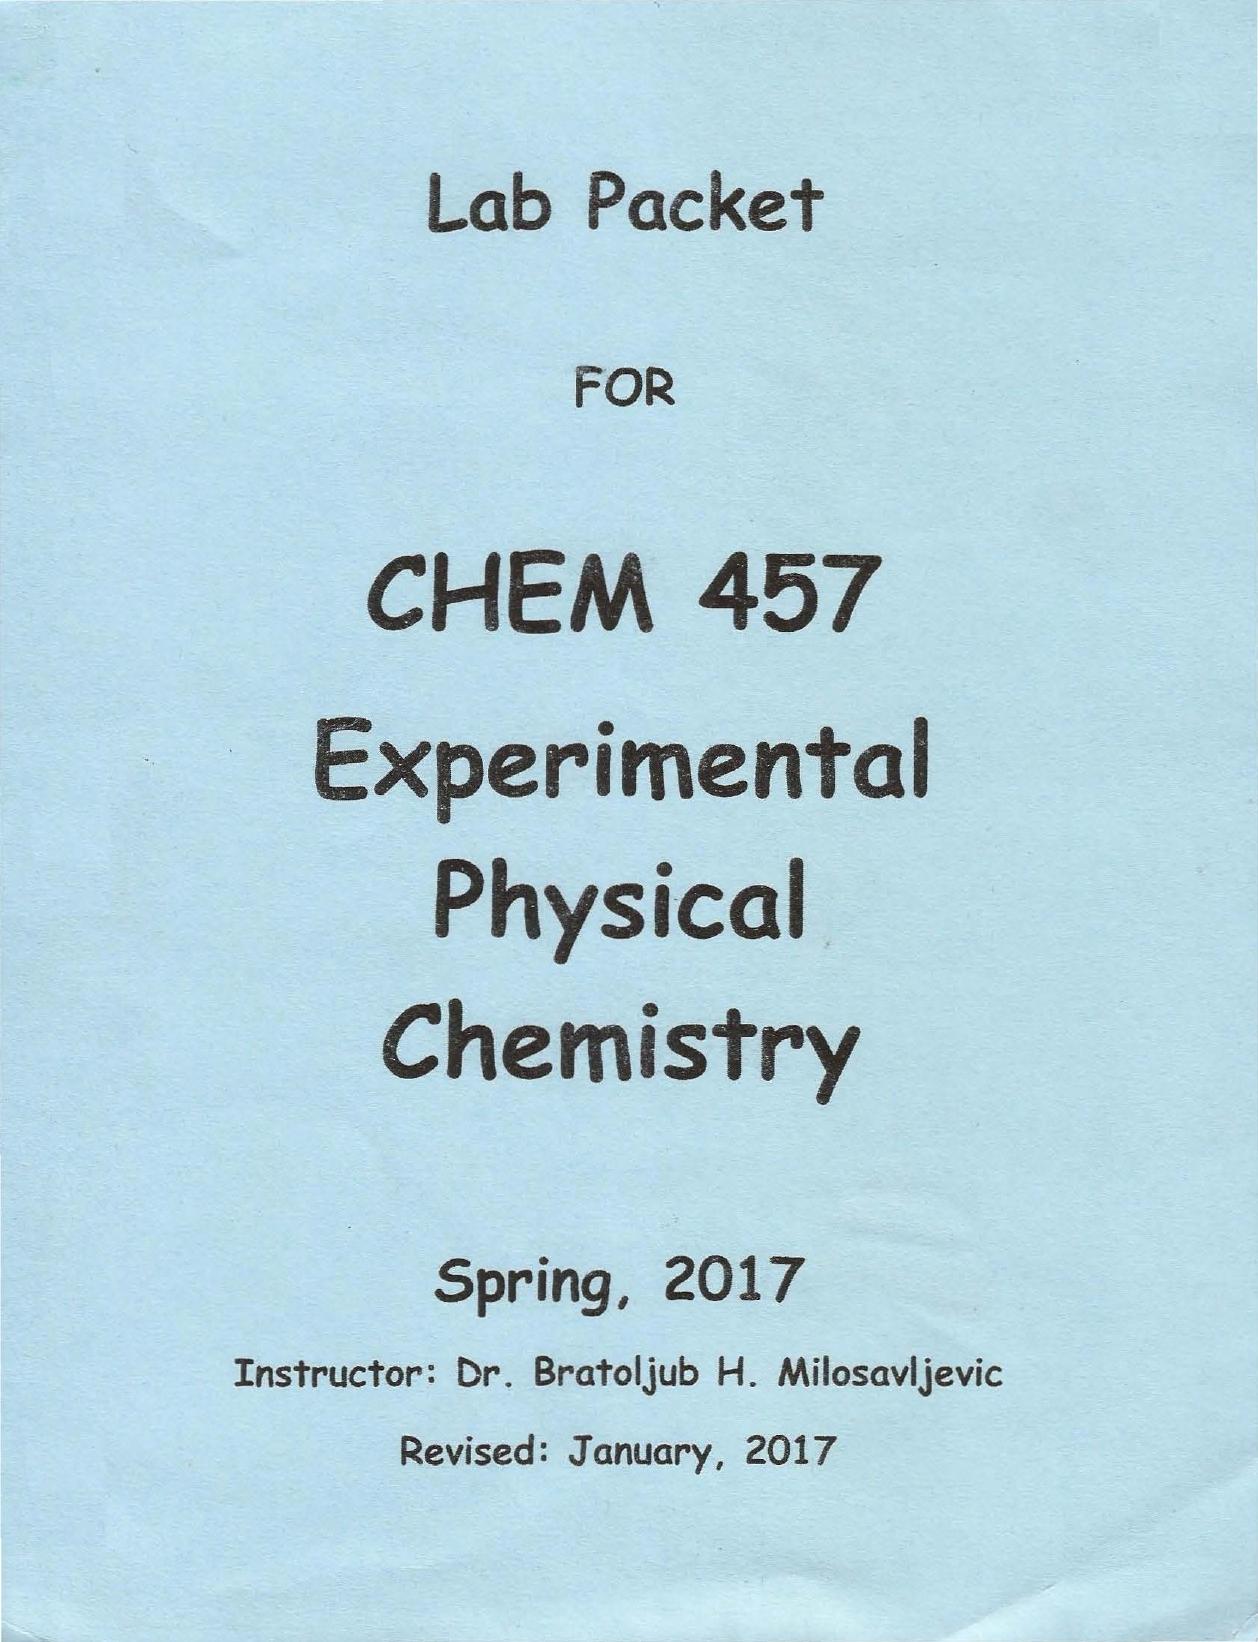 Lab Packet for Chem 457 Experimental Physical Chemistry 2017